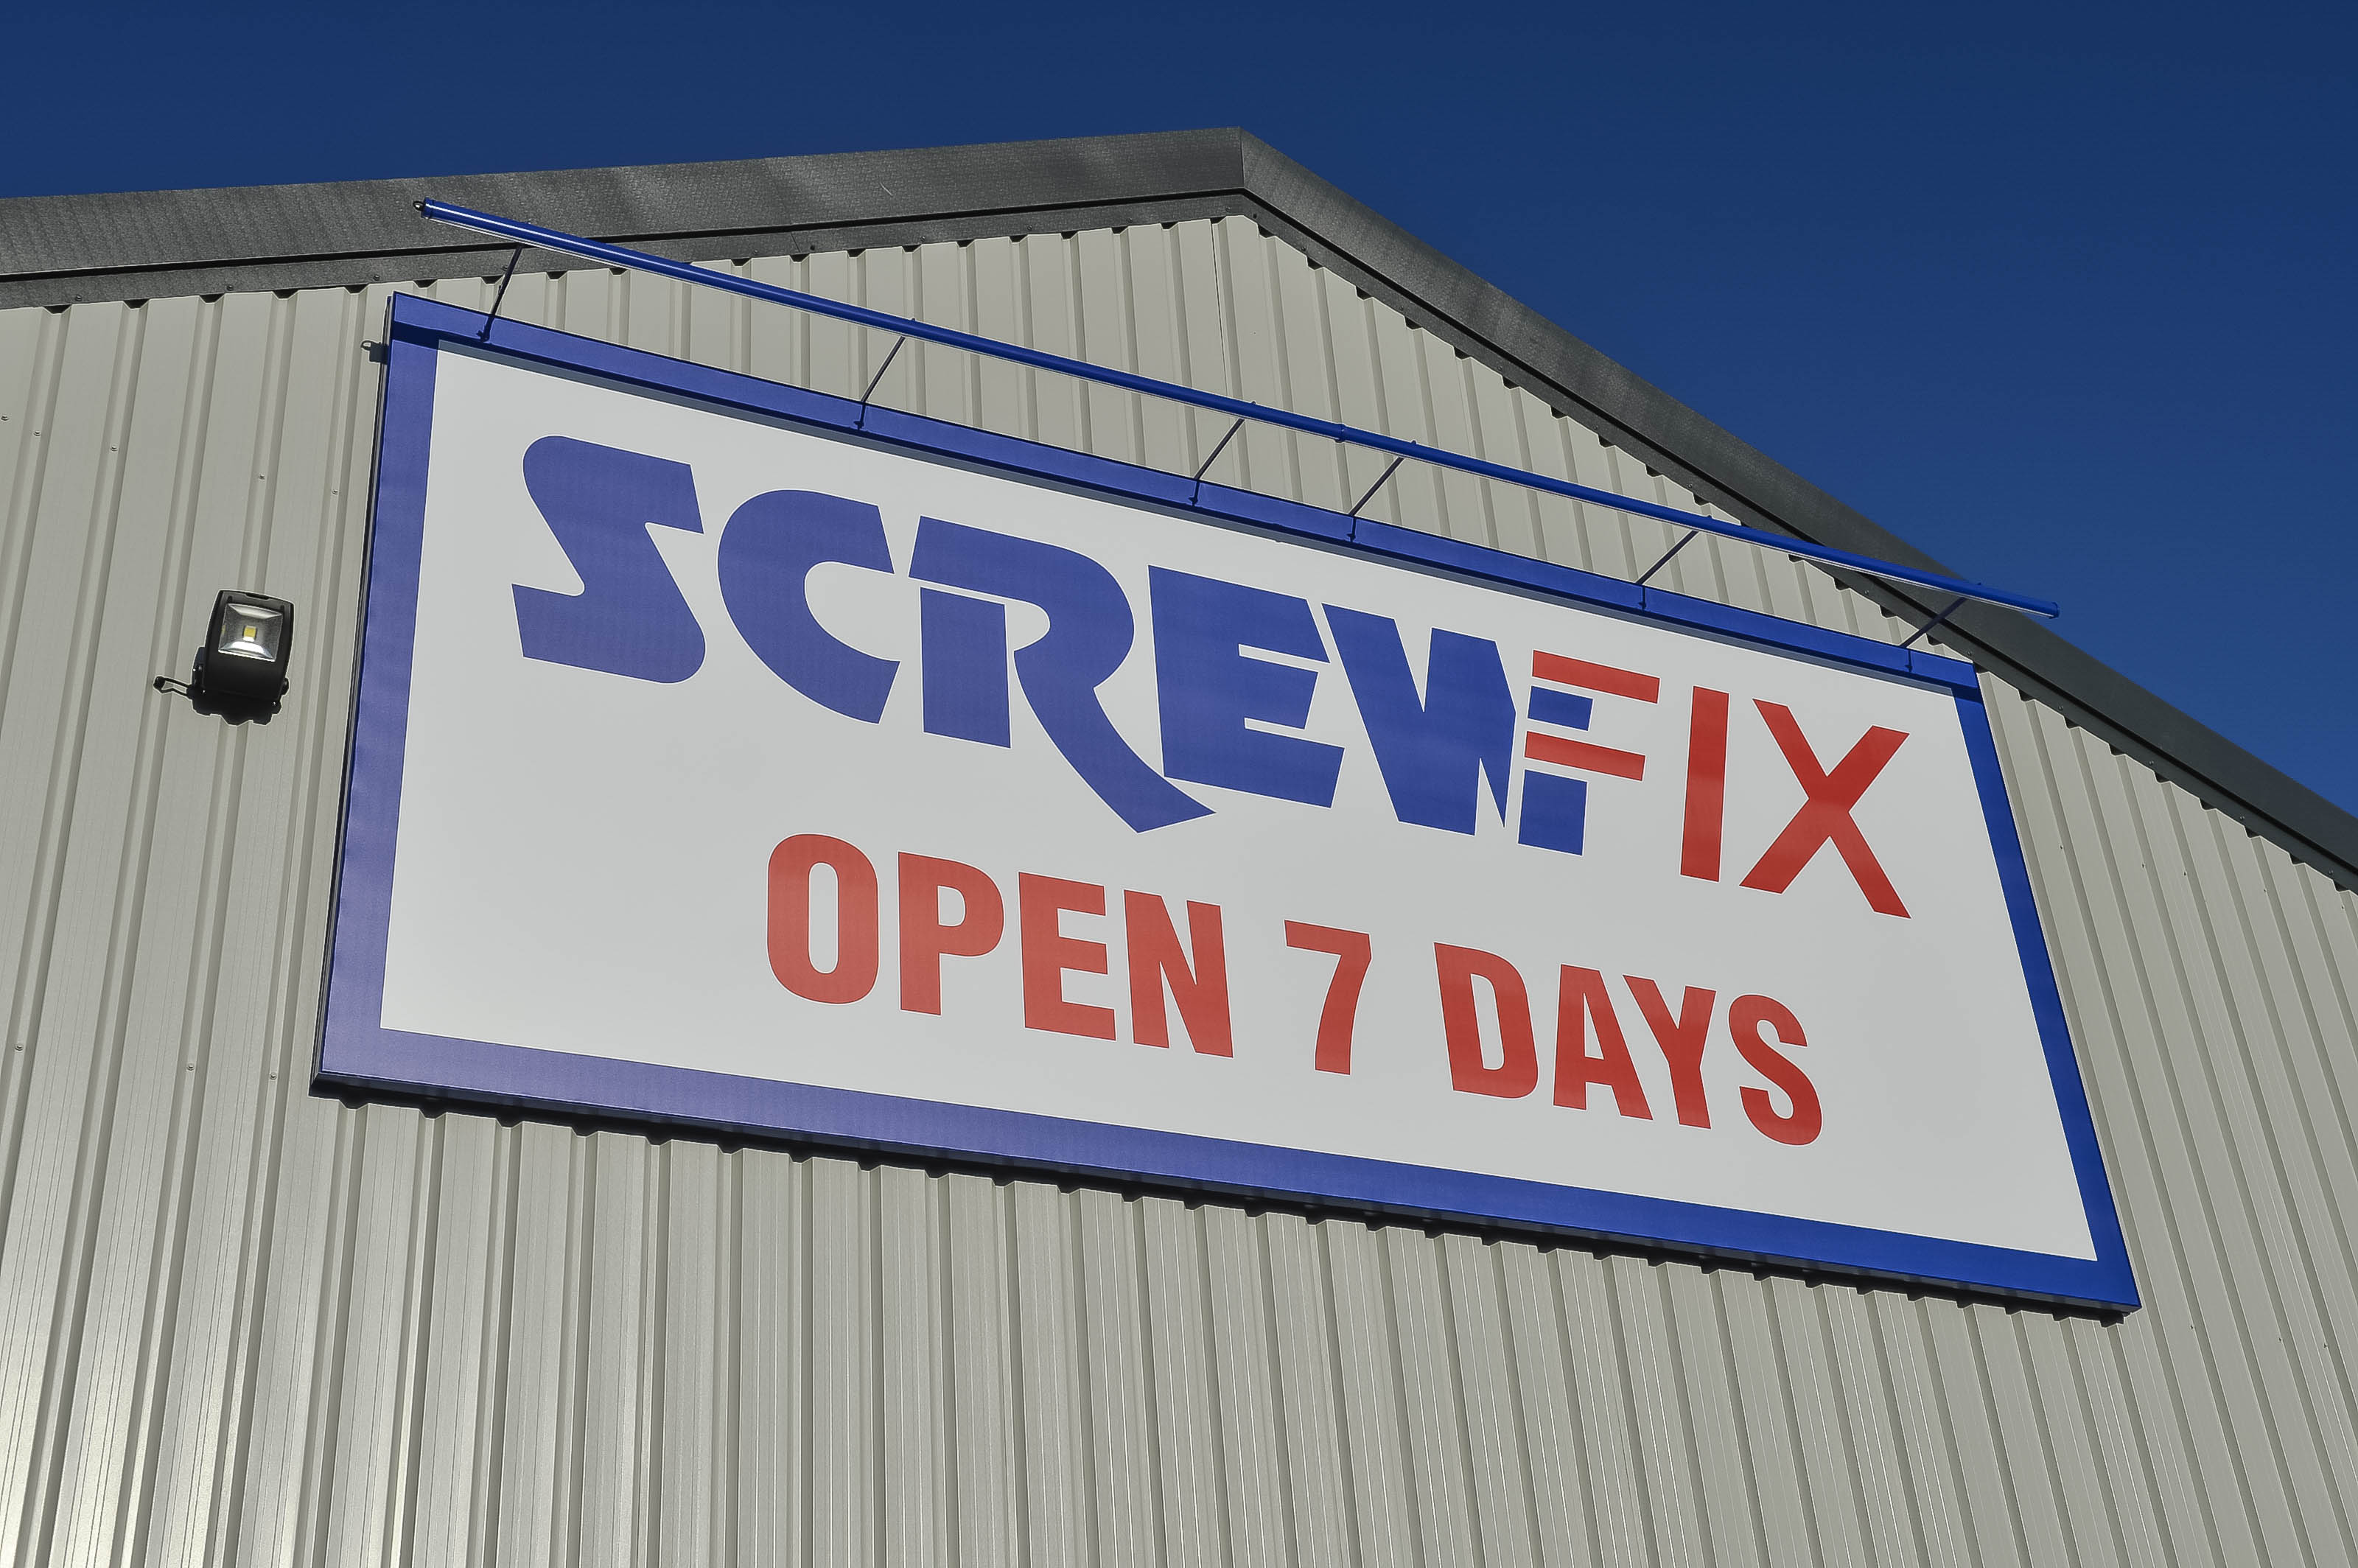 Jobs boost for Bromborough as new Screwfix store opens